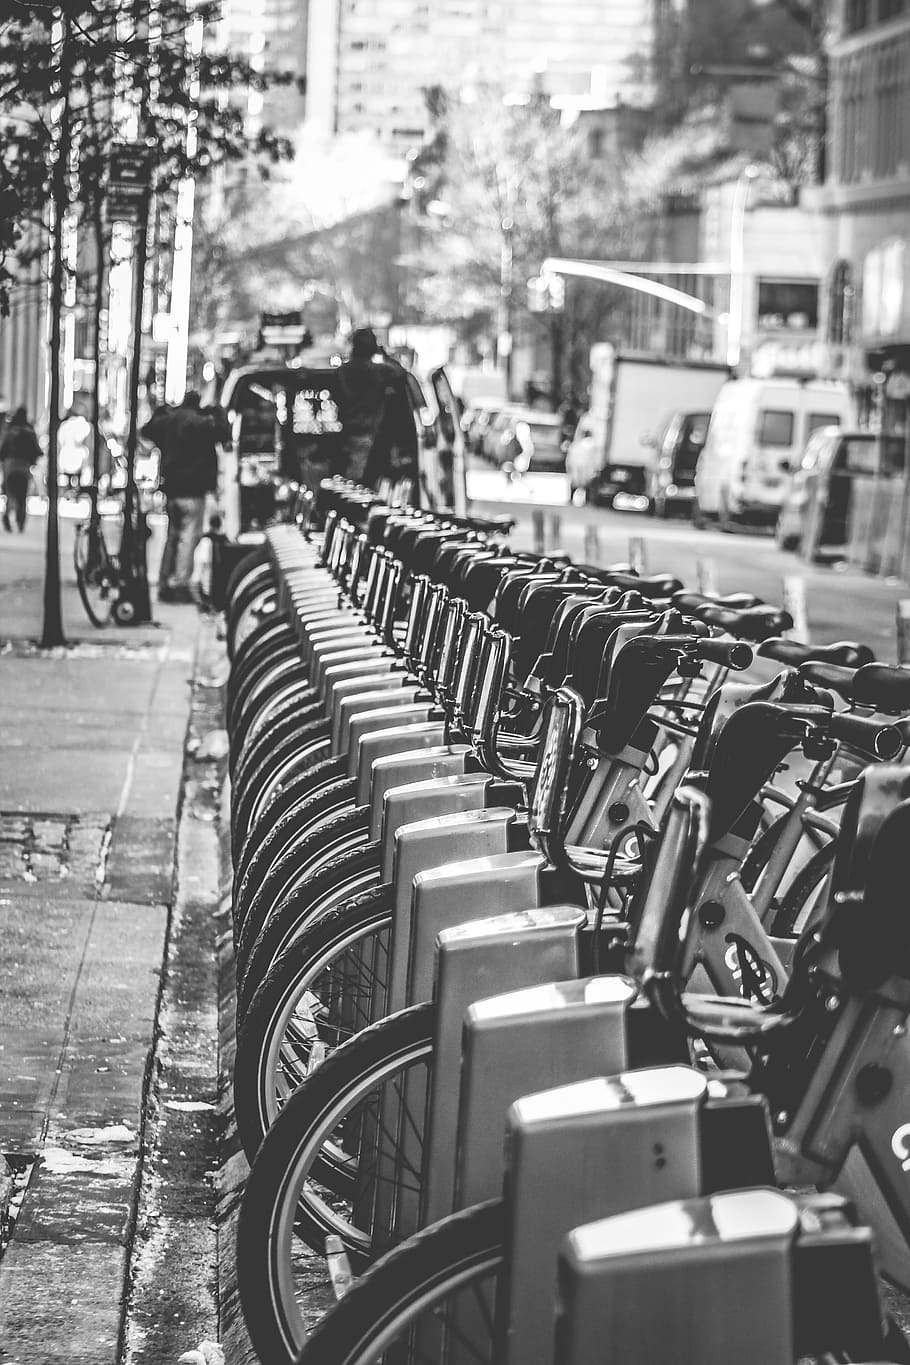 bikes, bicycles, city, streets, black and white, NYC, New York, mode of transportation, street, transportation